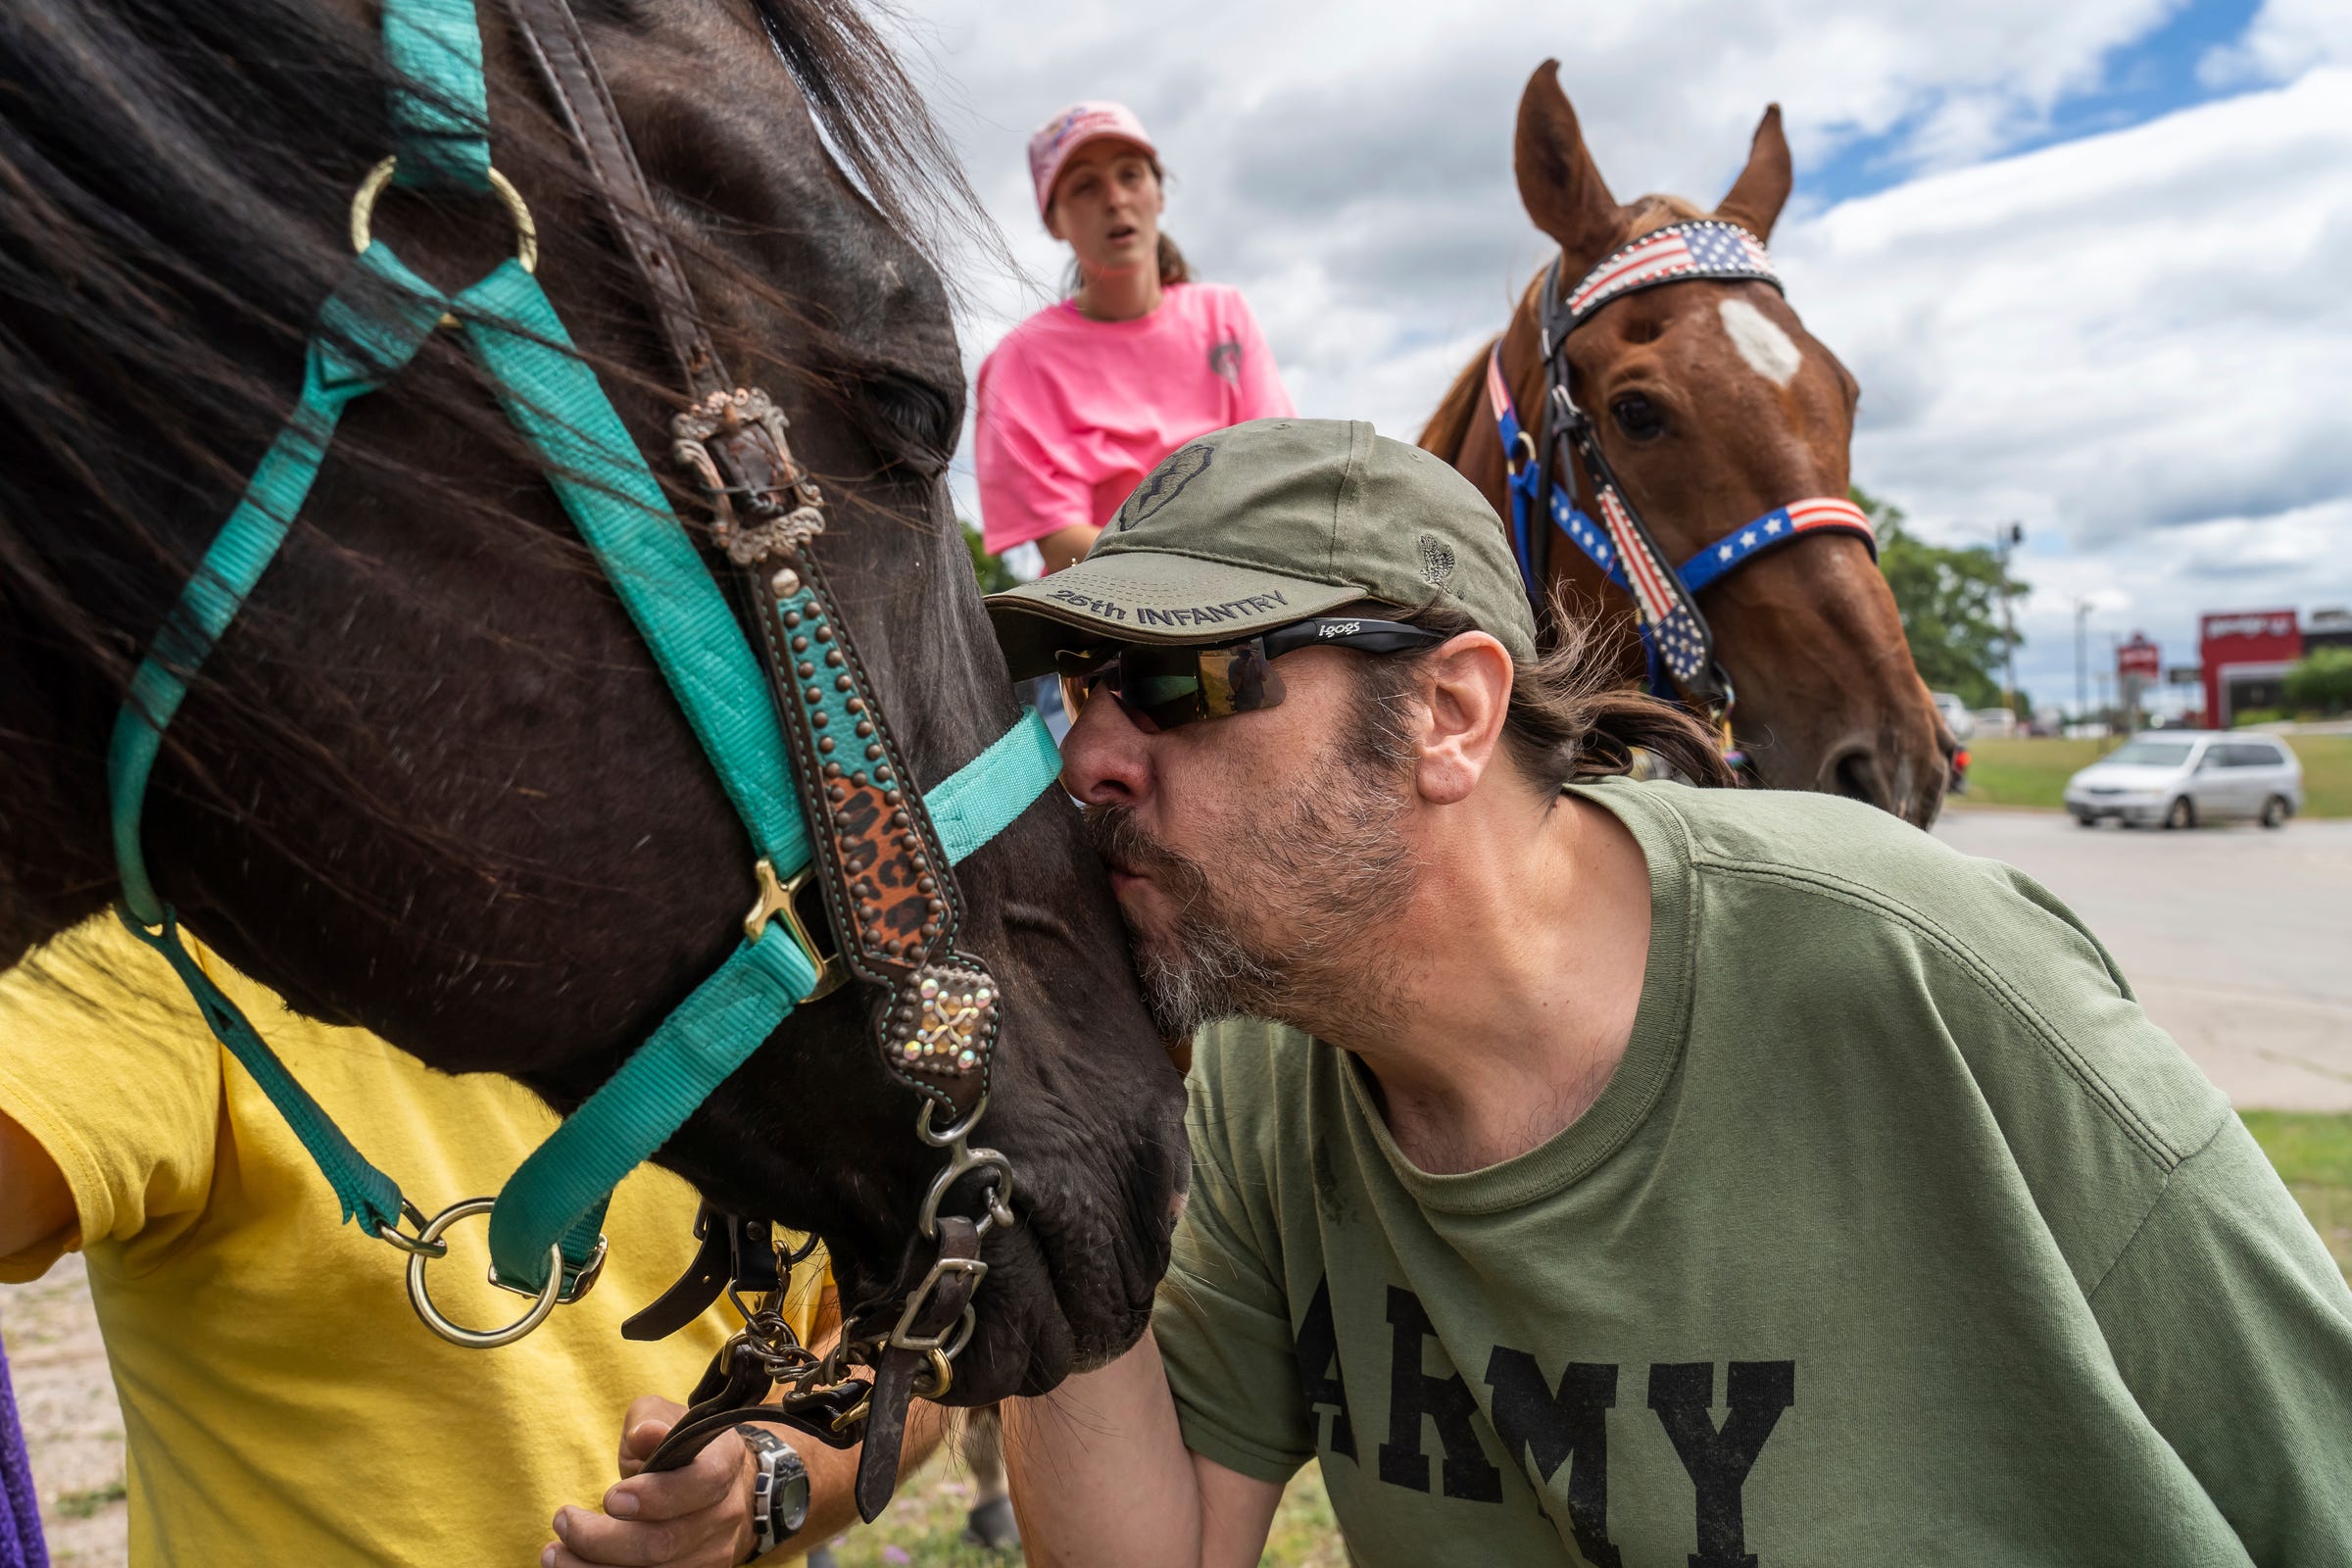 Army veteran Kurt Berger of Iron Mountain kisses Tucker the horse after Steven Pringle, owner of Build a Bicycle - Bicycle Therapy, and his girlfriend Lindsey Gagne of Kingsford brought the horse to Berger's apartment in downtown Iron Mountain to give him a chance to ride them on Friday, July 29, 2022. "I love animals," said Berger, who admitted that he suffers from PTSD. "It takes all my problems away for the moment. I feel so good today that I don’t feel like I need my medication."